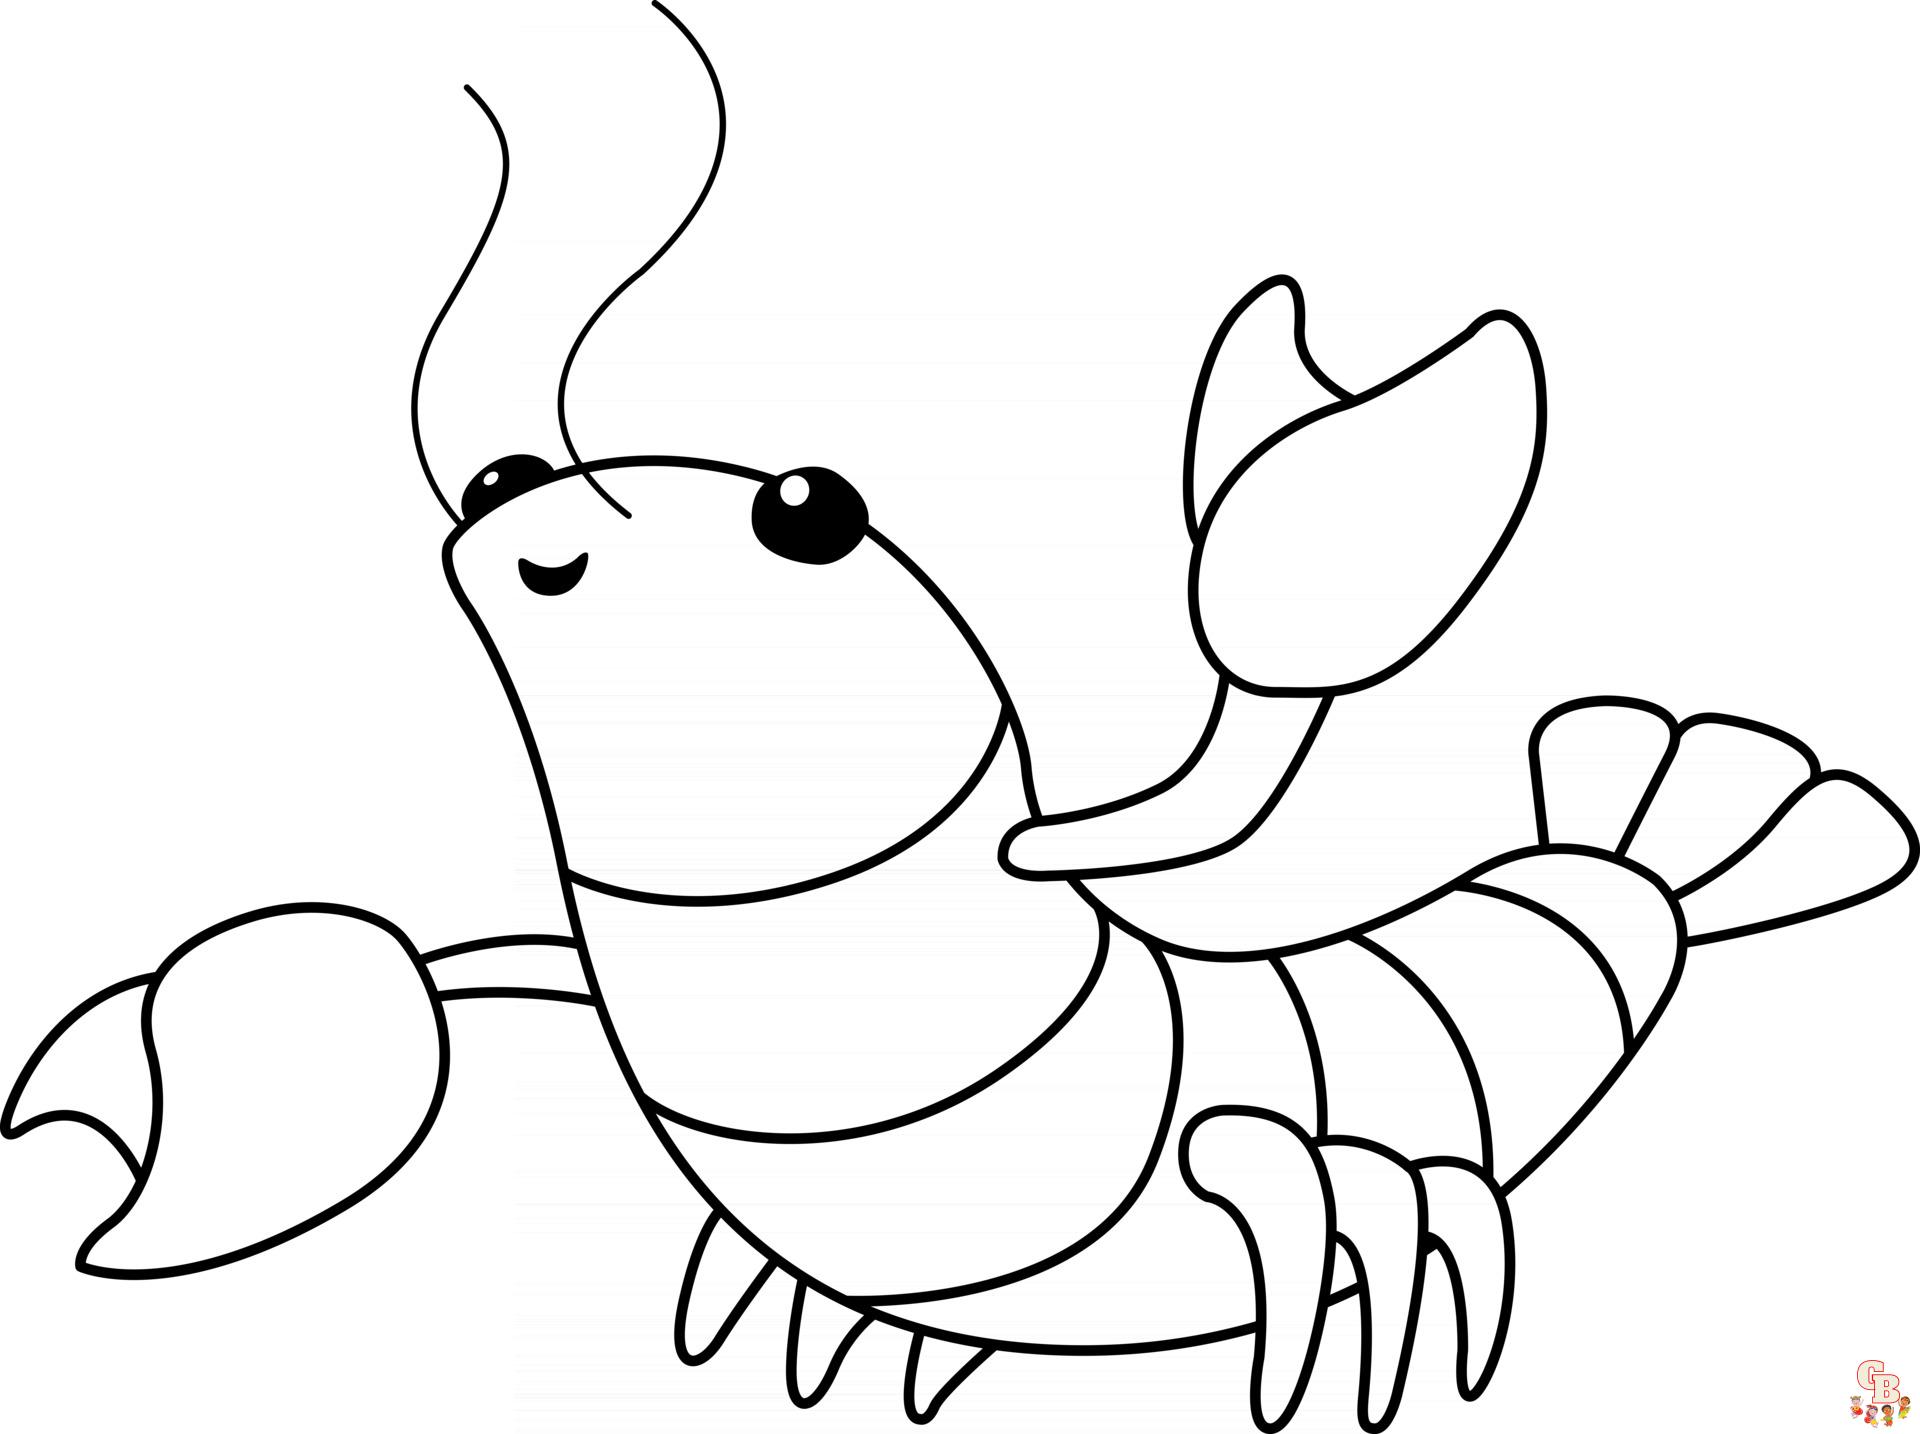 Lobster Coloring Pages 15